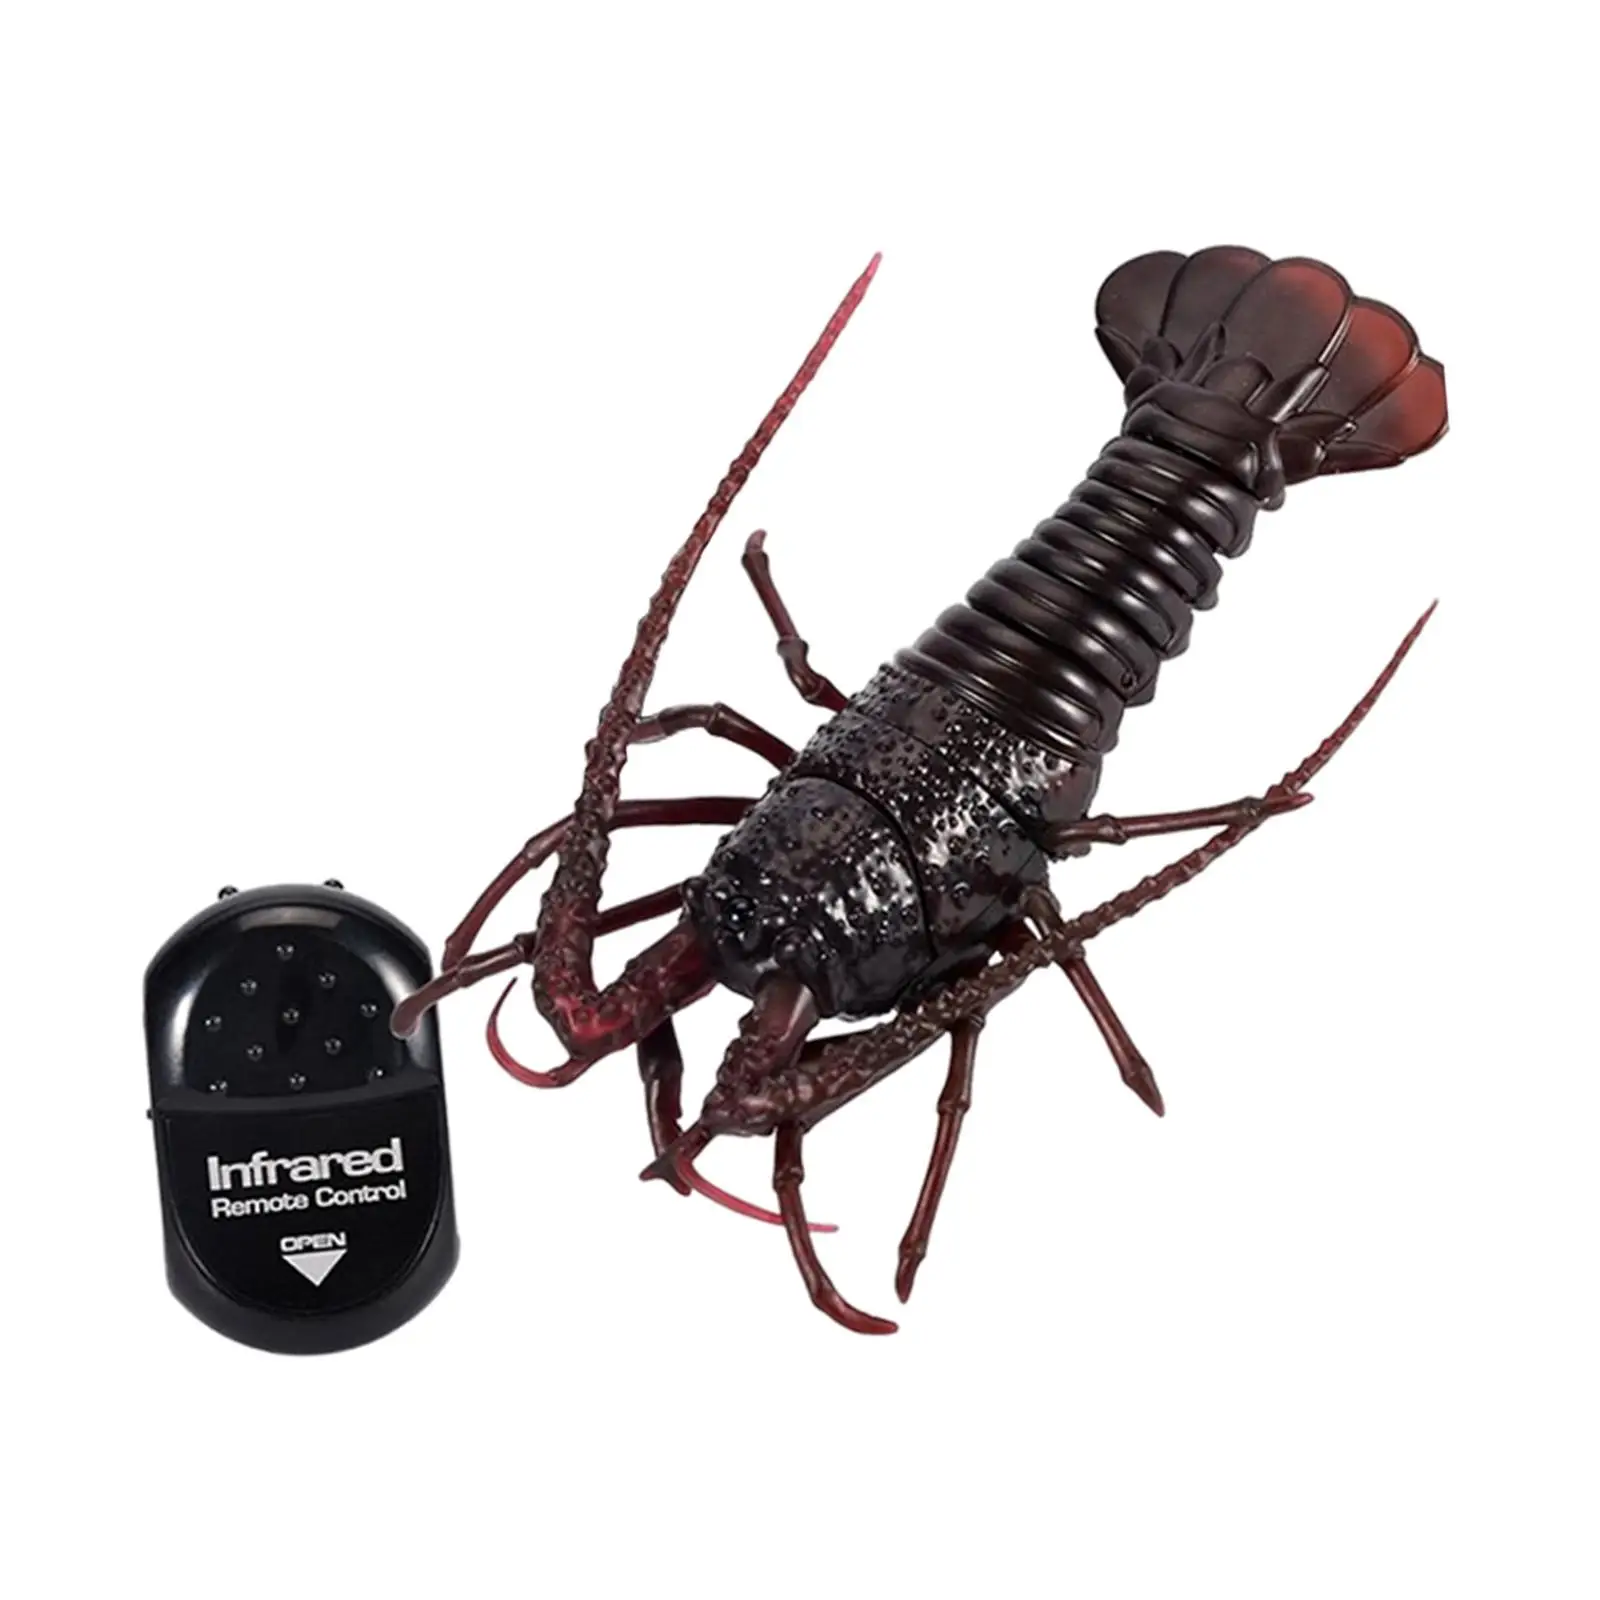 RC Remote Control Simulation Crawfish Vehicle Car Pet Model Electric Infrared RC Shrimp for Girls Boys Kids Birthday Gifts